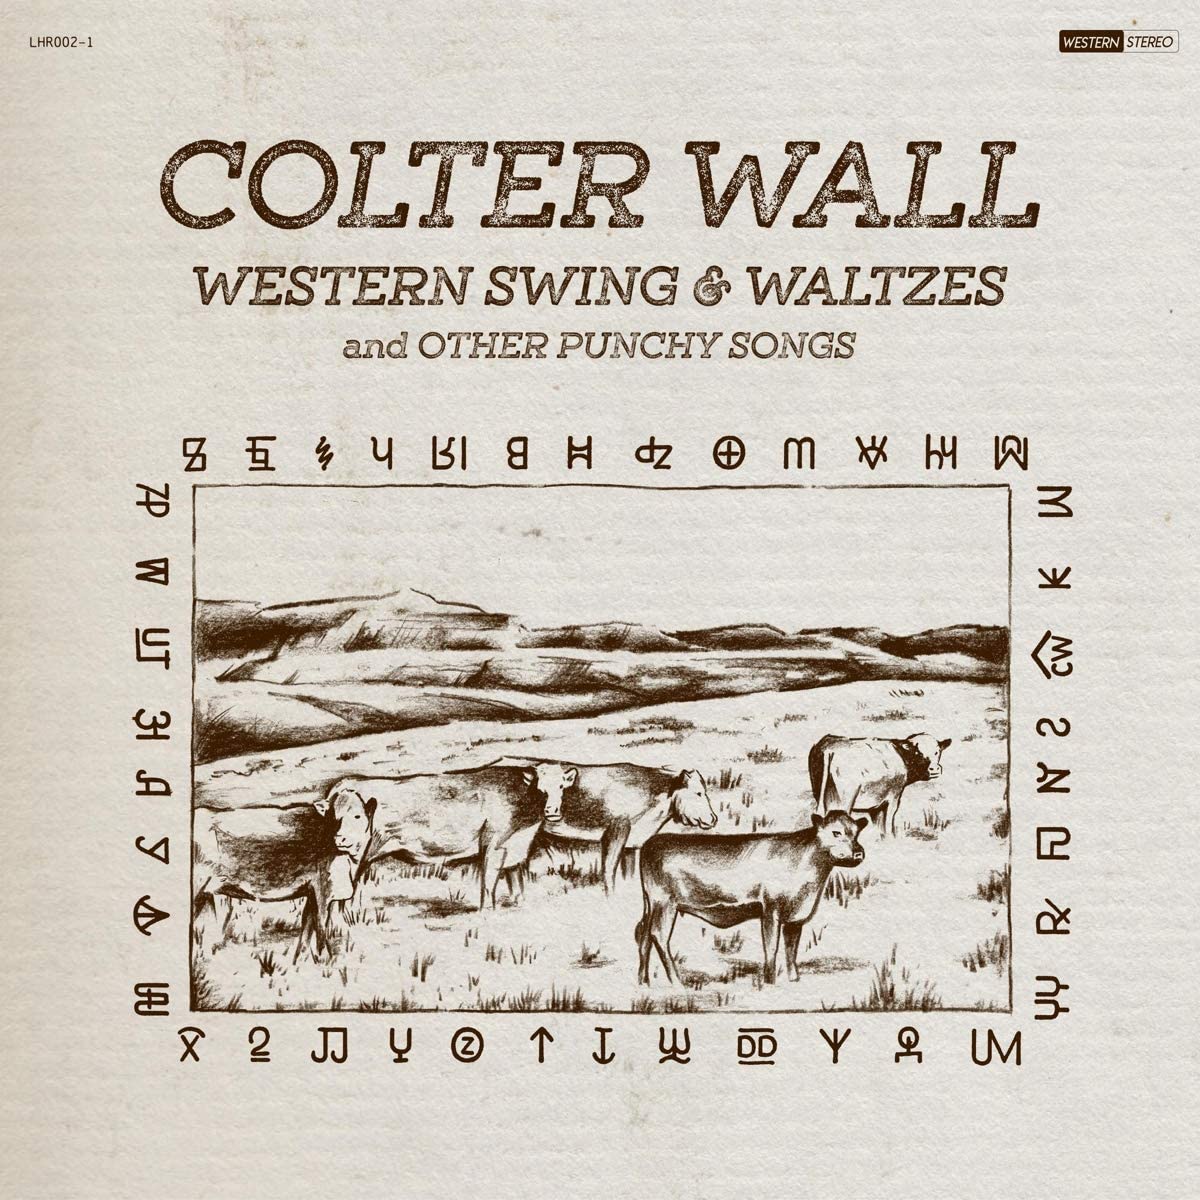 Wall, Colter/Western Swing & Waltzes And Other Punchy Songs [LP]